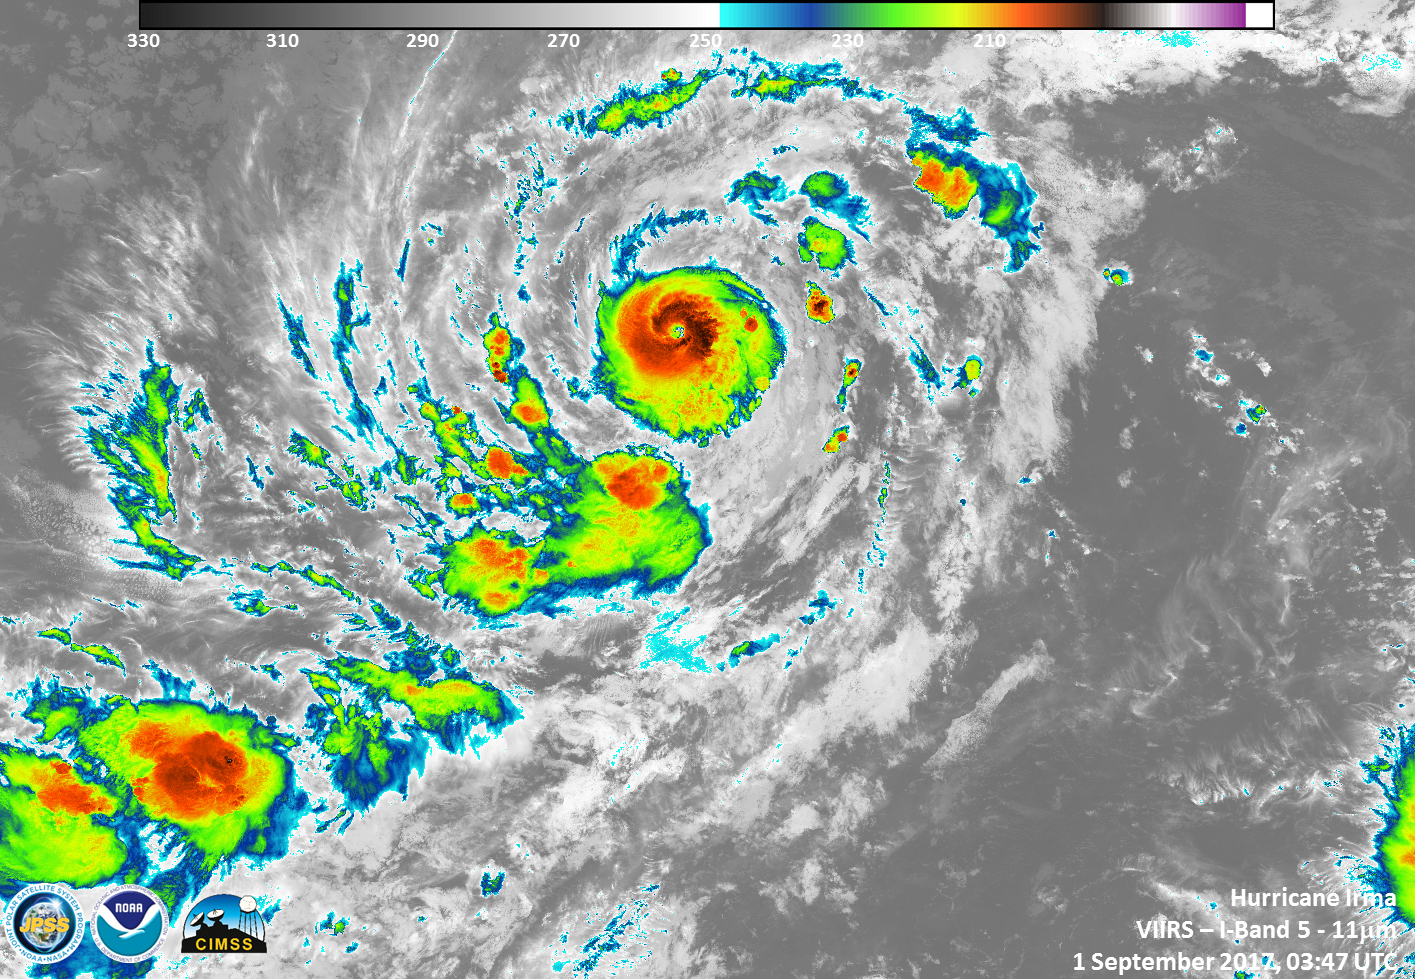 Infrared satellite image of Irma with cloud temperatures in reds, oranges, yellows, and greens.